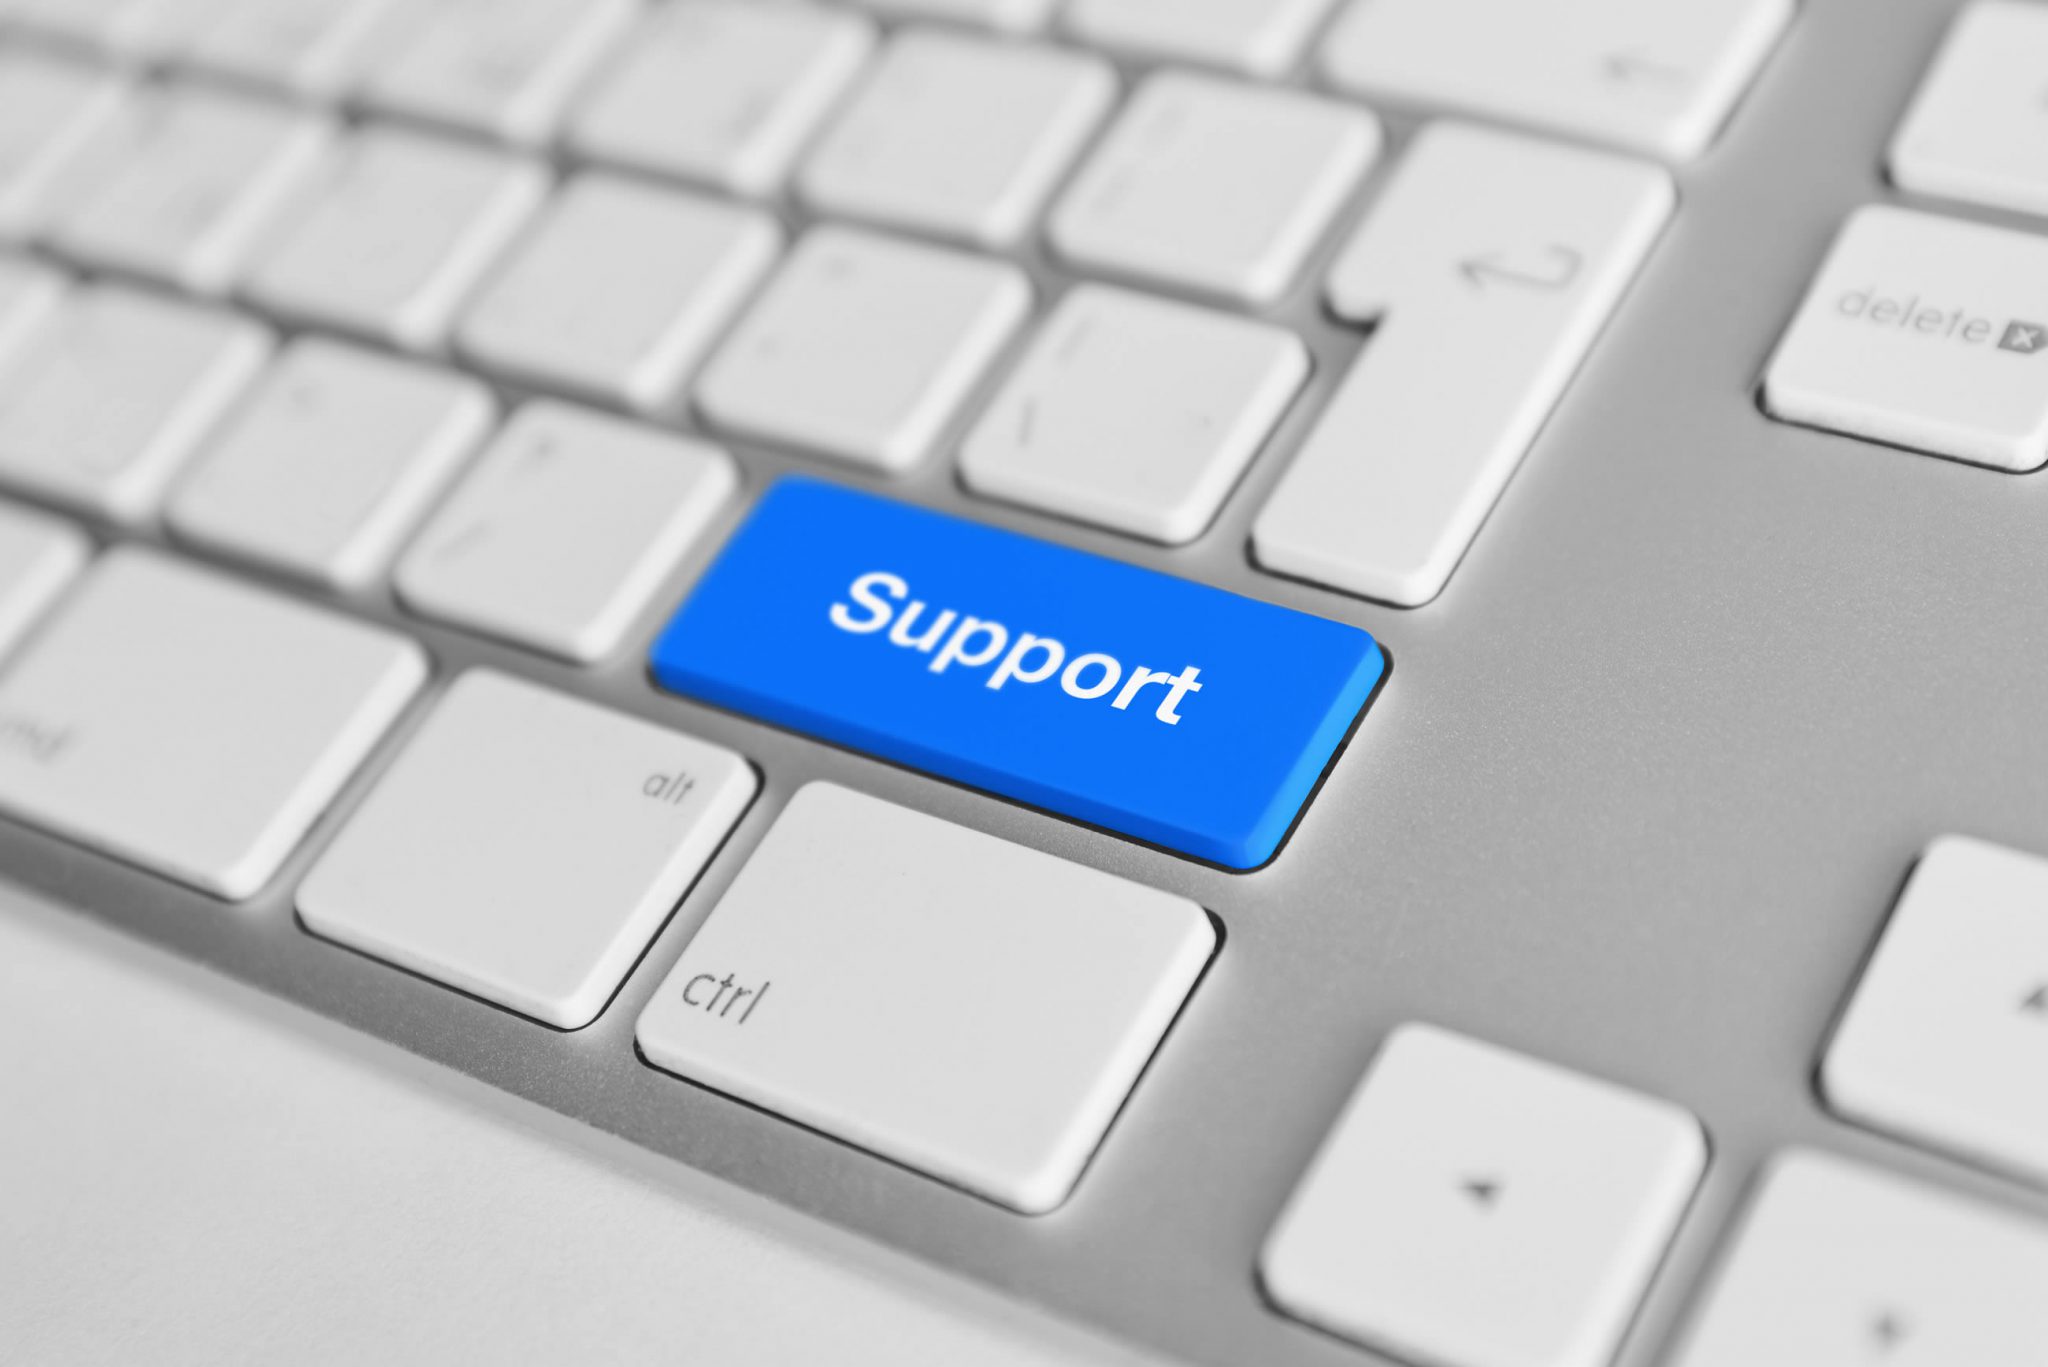 ICT SUPPORT SERVICES FOR SCHOOLS